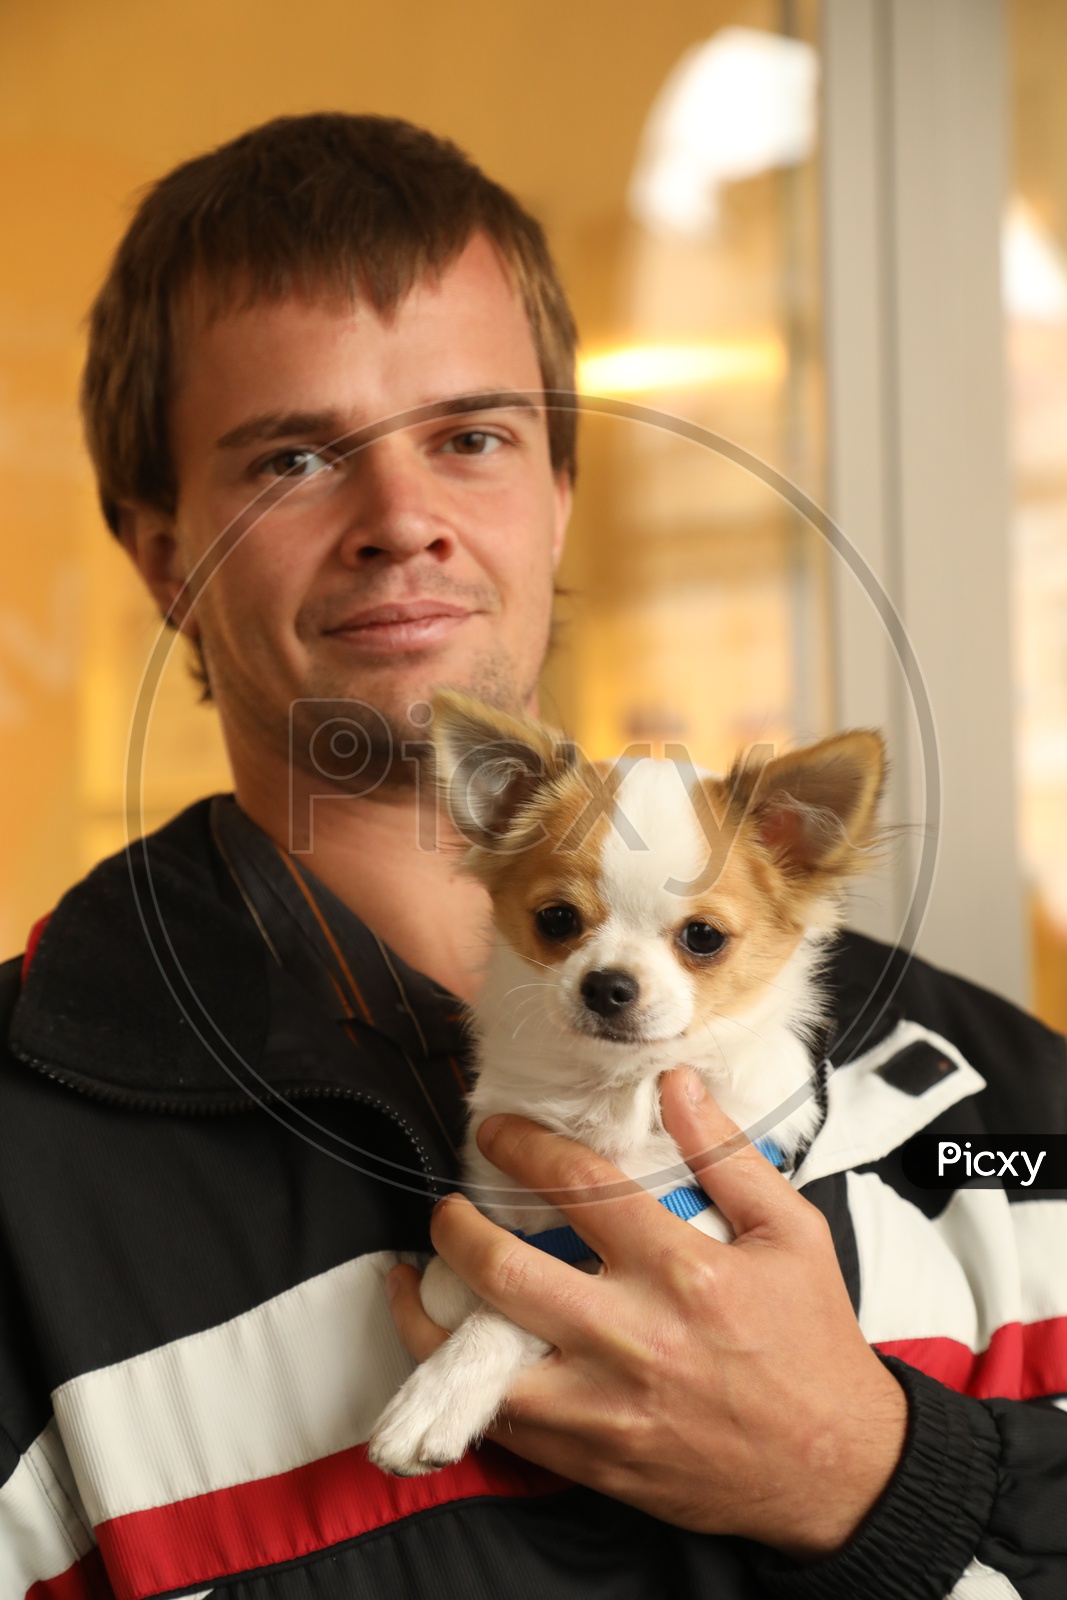 A man smiling and holding a dog in his hand